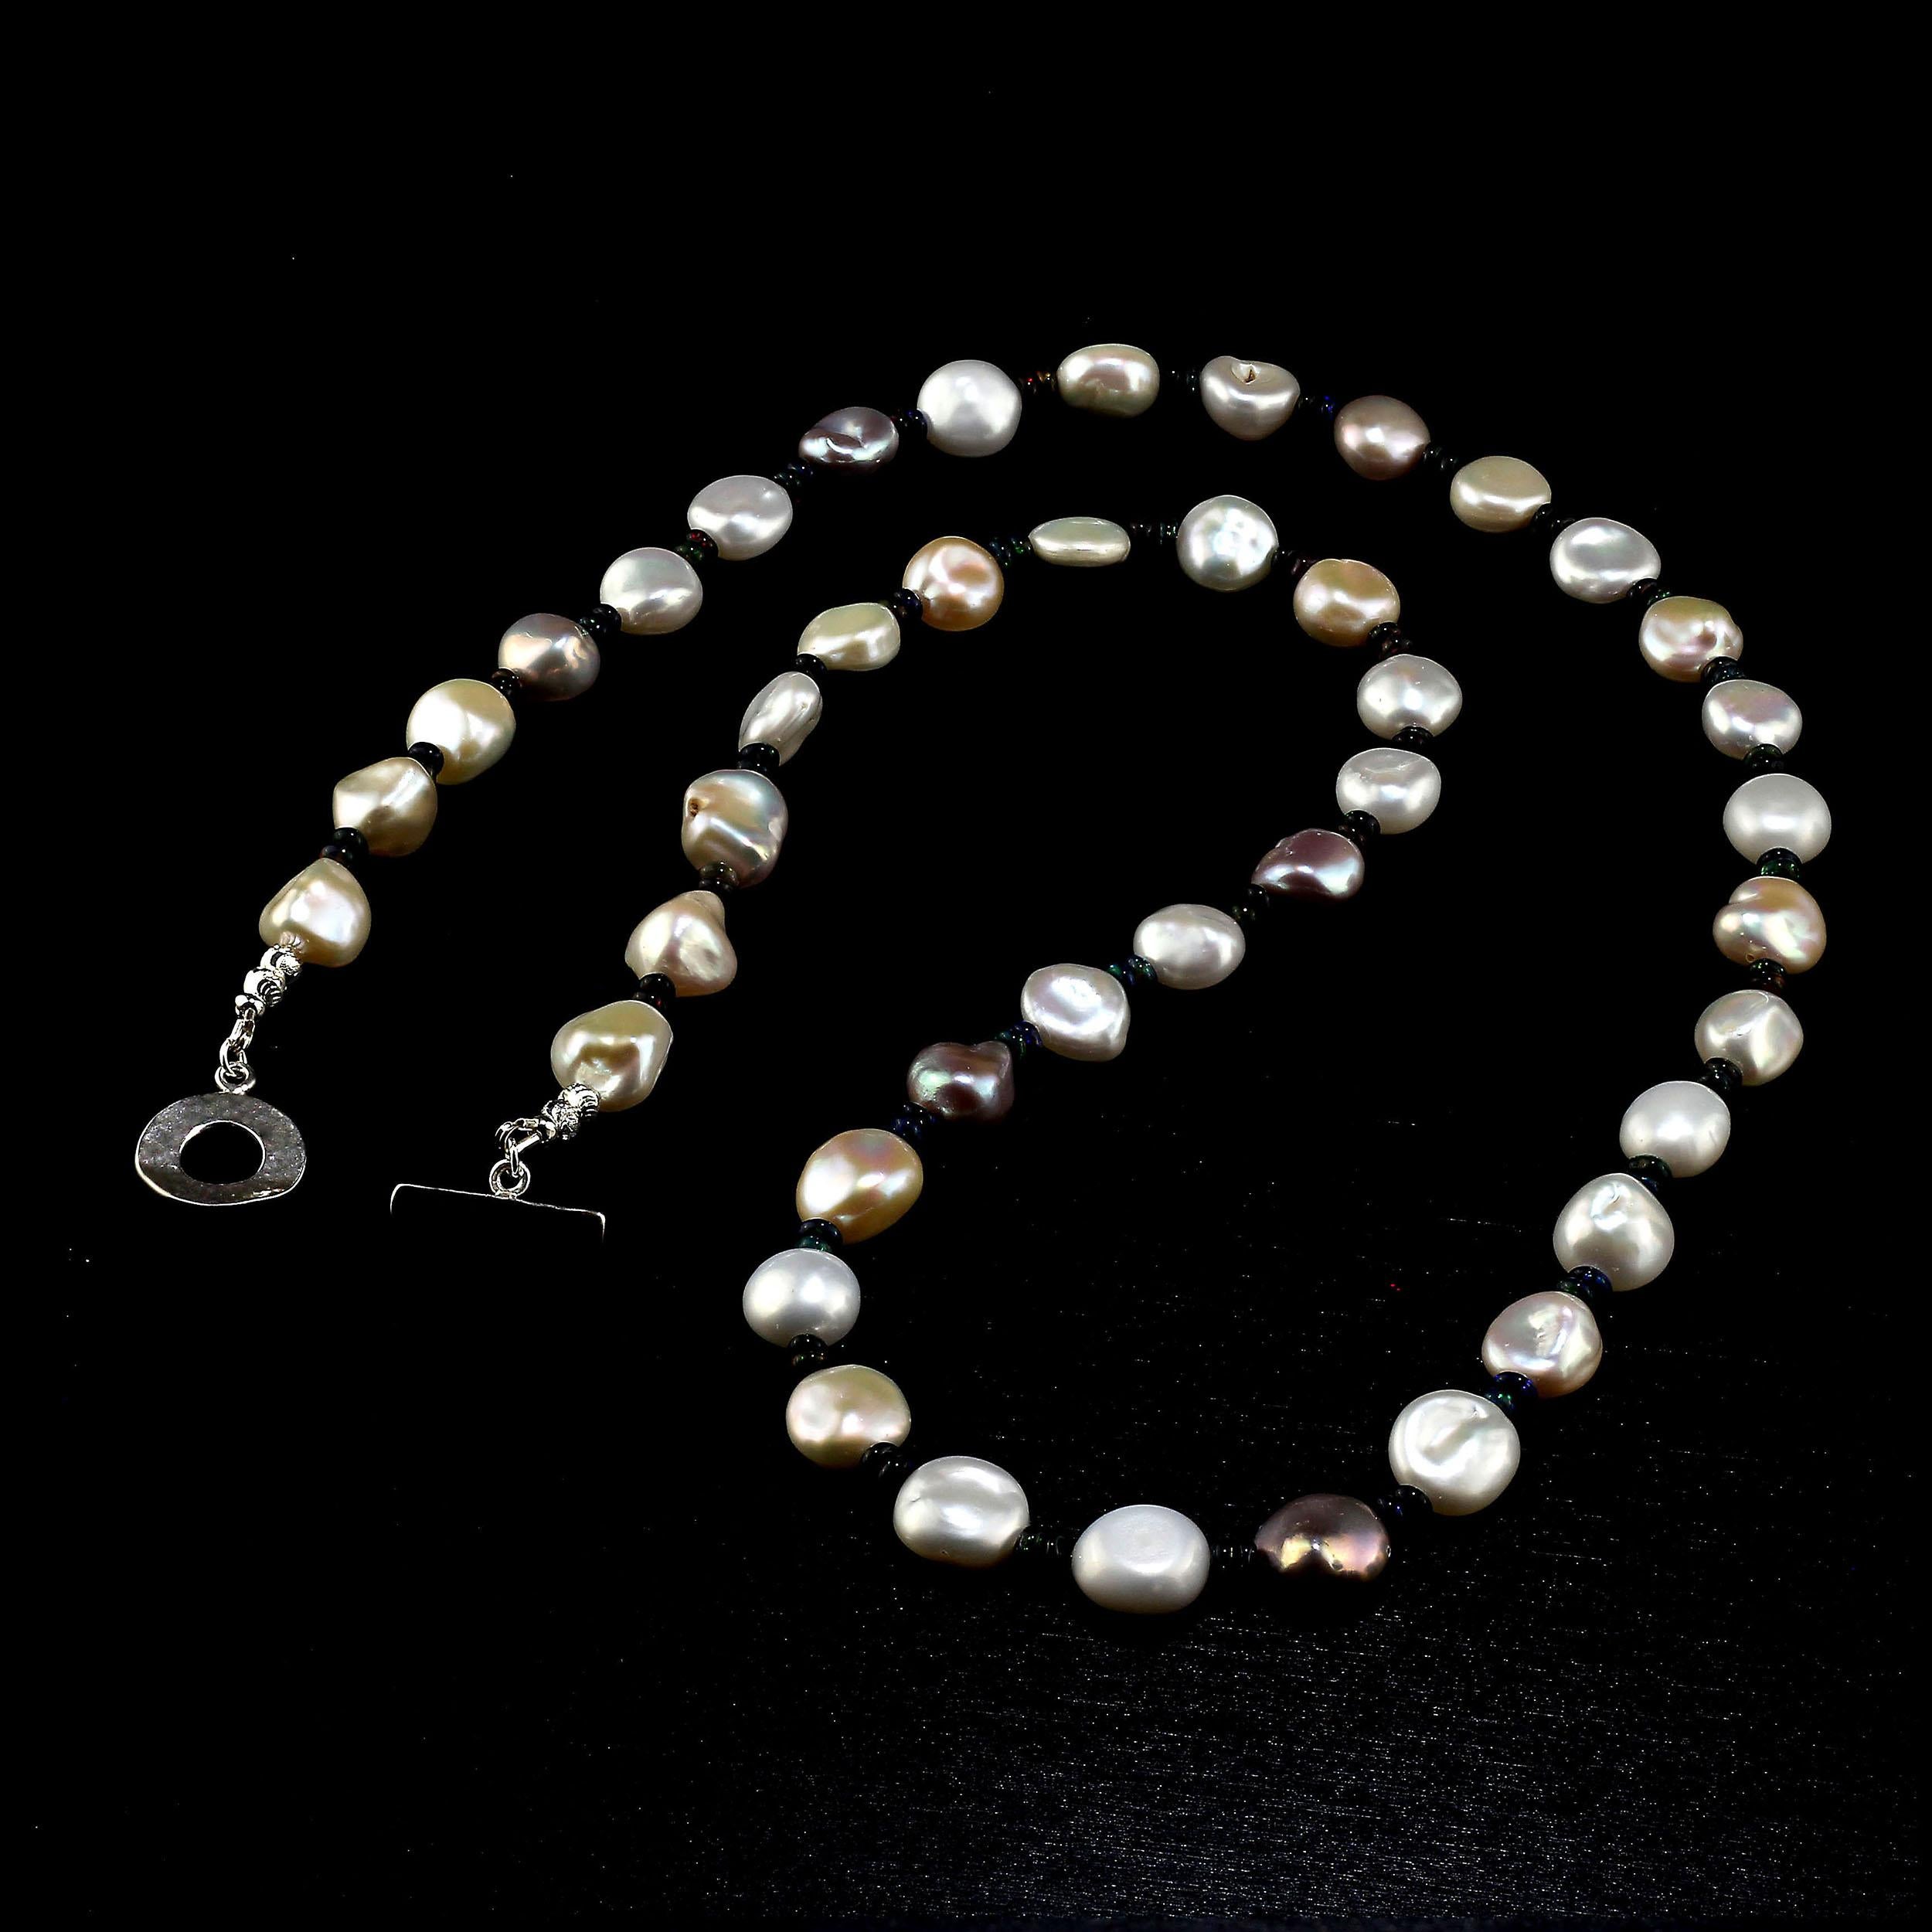 Glowing, Freshwater Pearl Necklace with Black Opal Accents 1